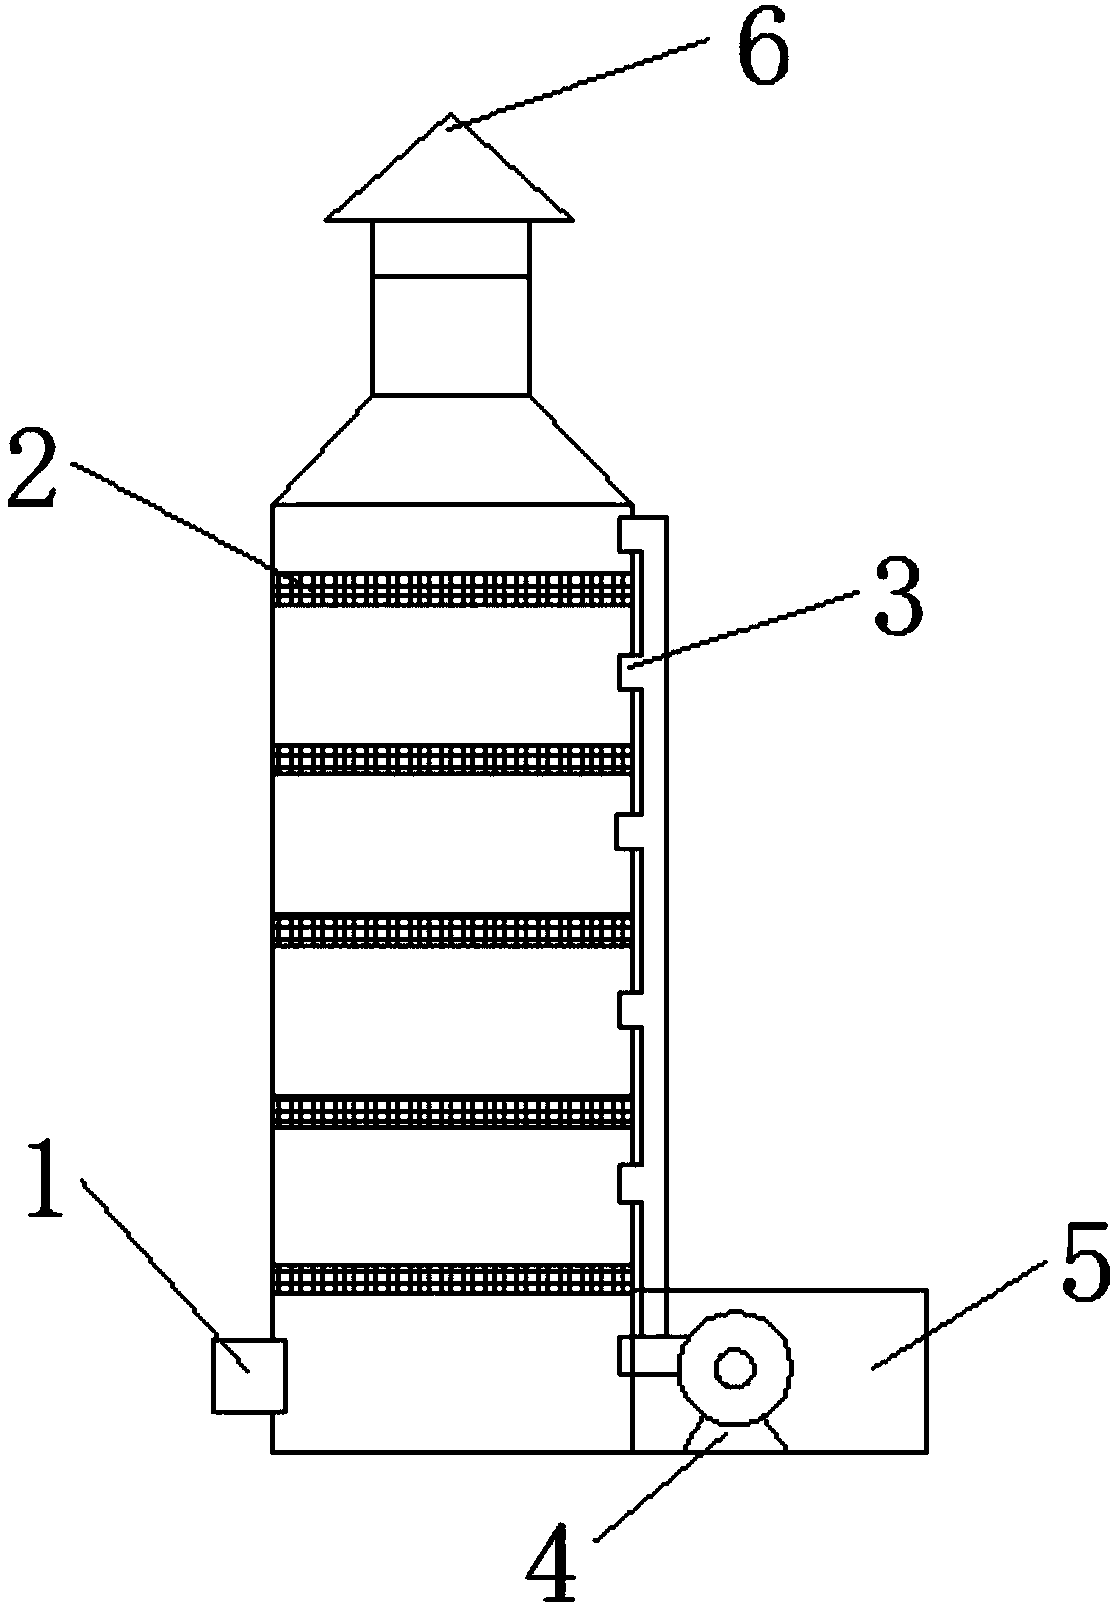 Treatment system and method for acrylic acid and ester waste oil of acrylic acid